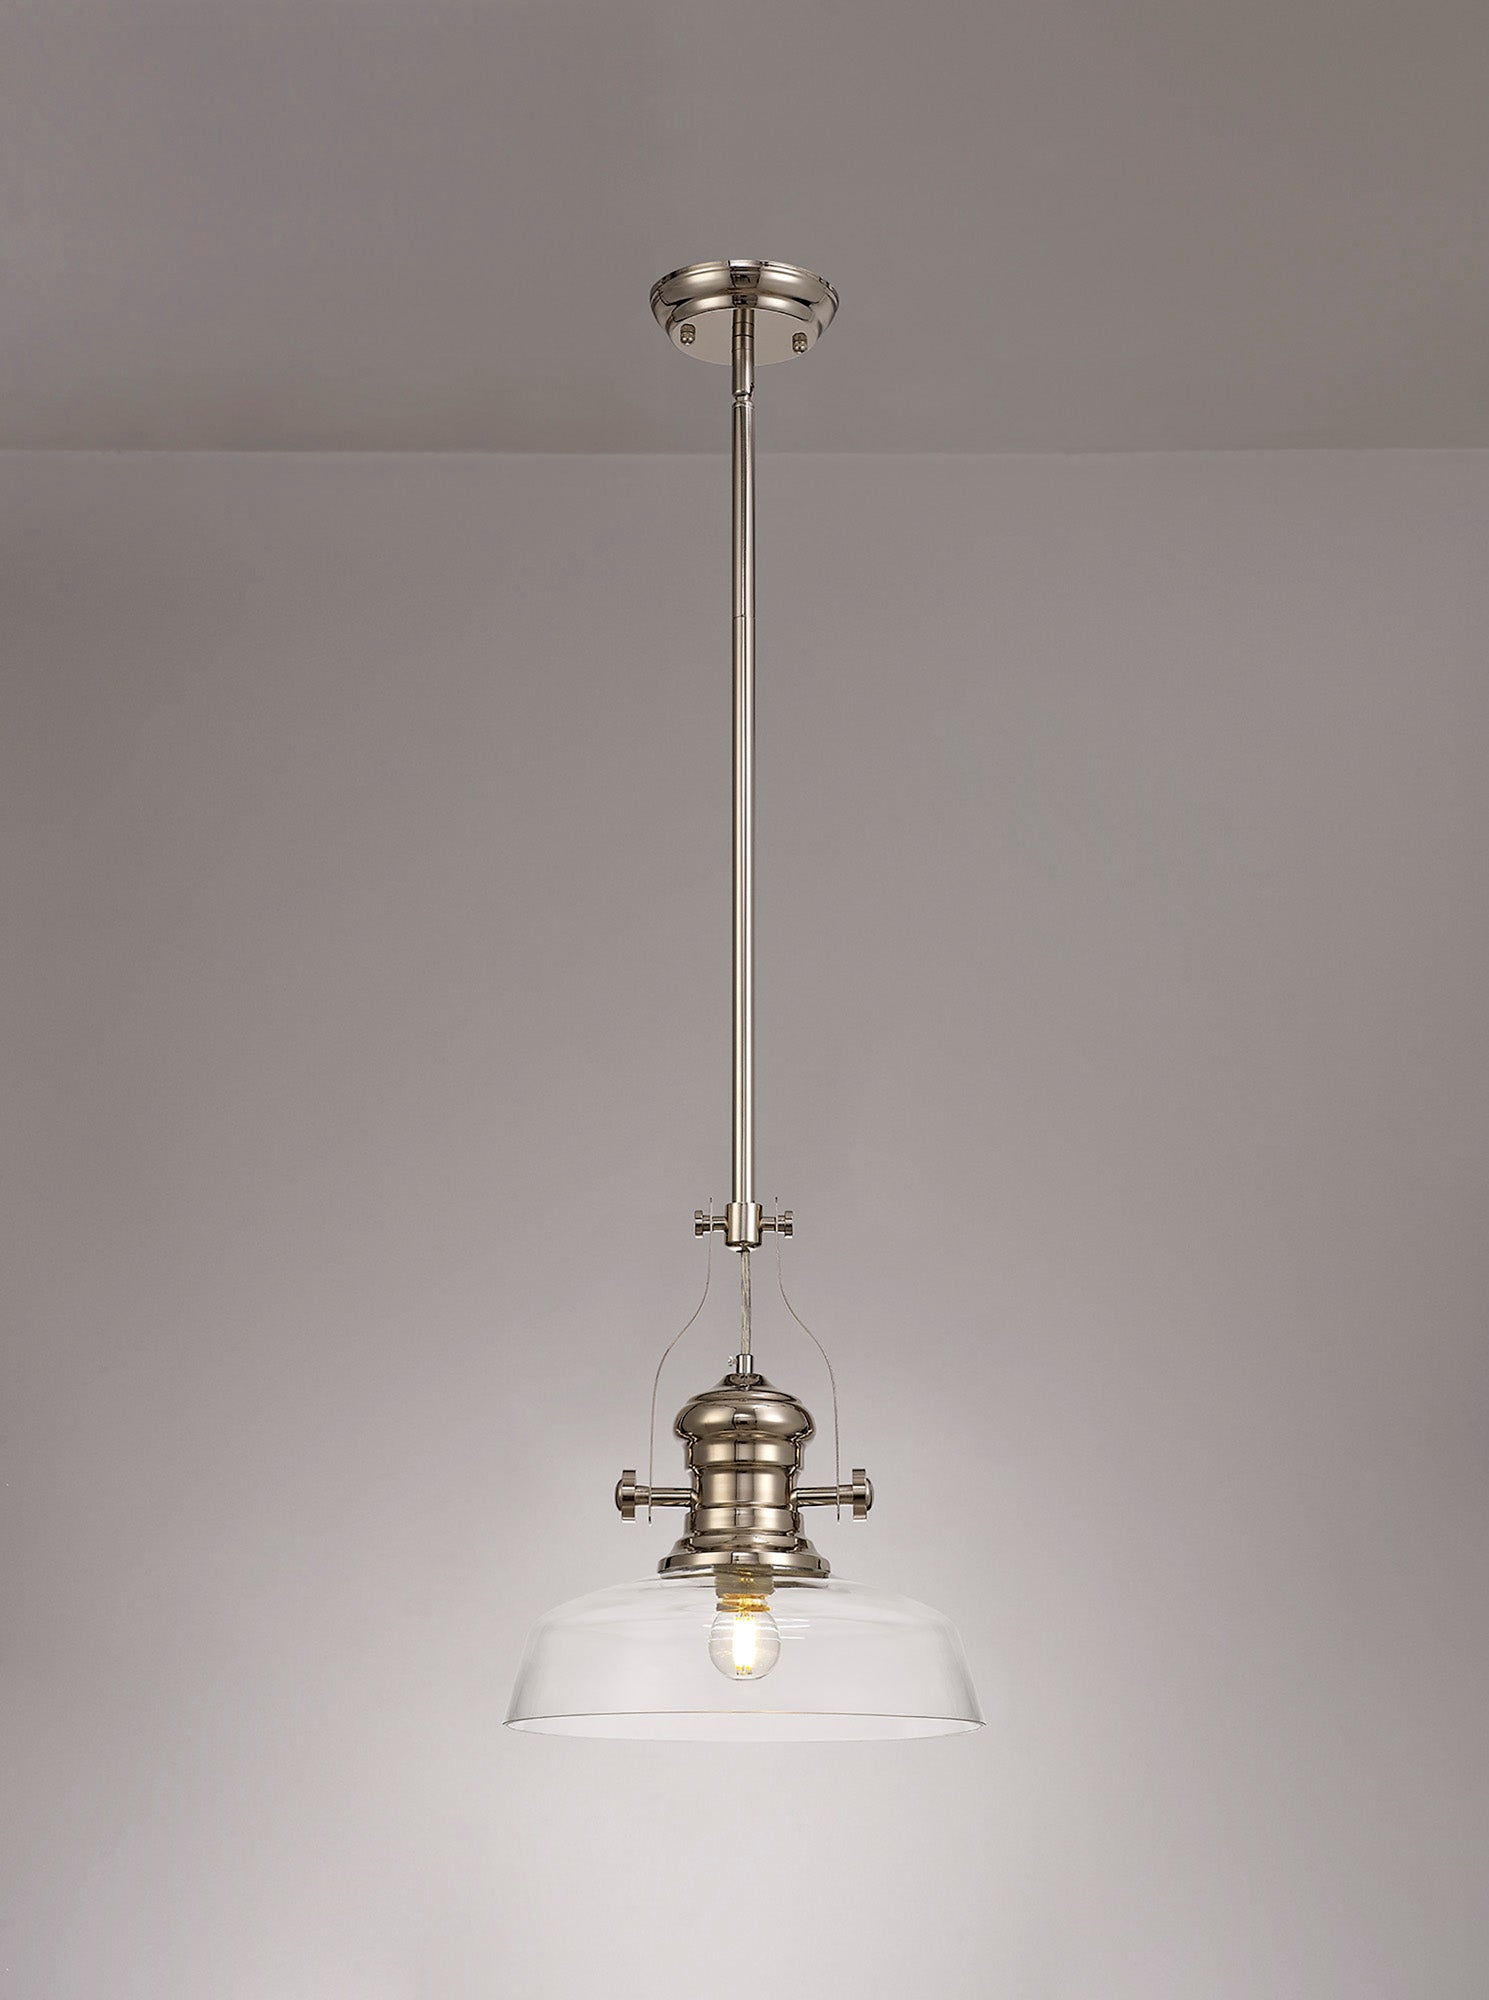 Docker 1 Light Pendant E27 With 30cm Flat Round Glass Shade, Polished Nickel/Clear